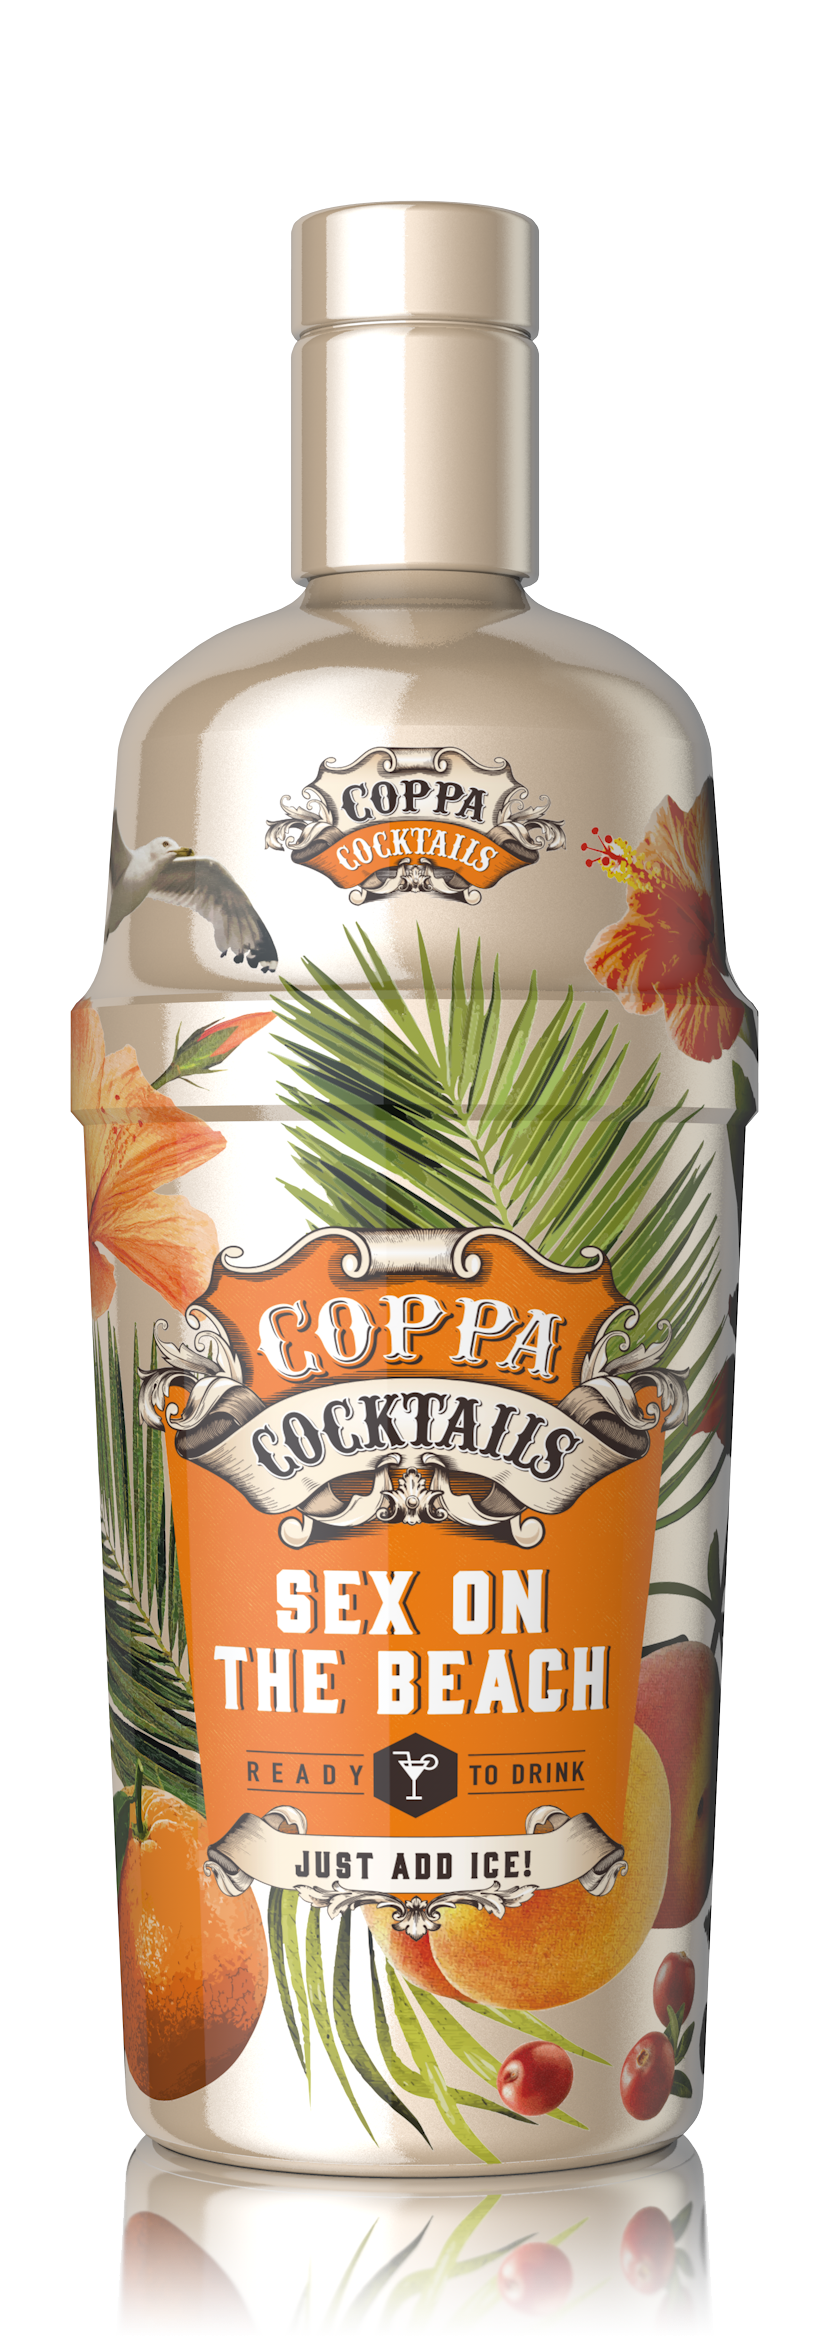 Coppa Cocktails Sex On The Beach 70cl 10%